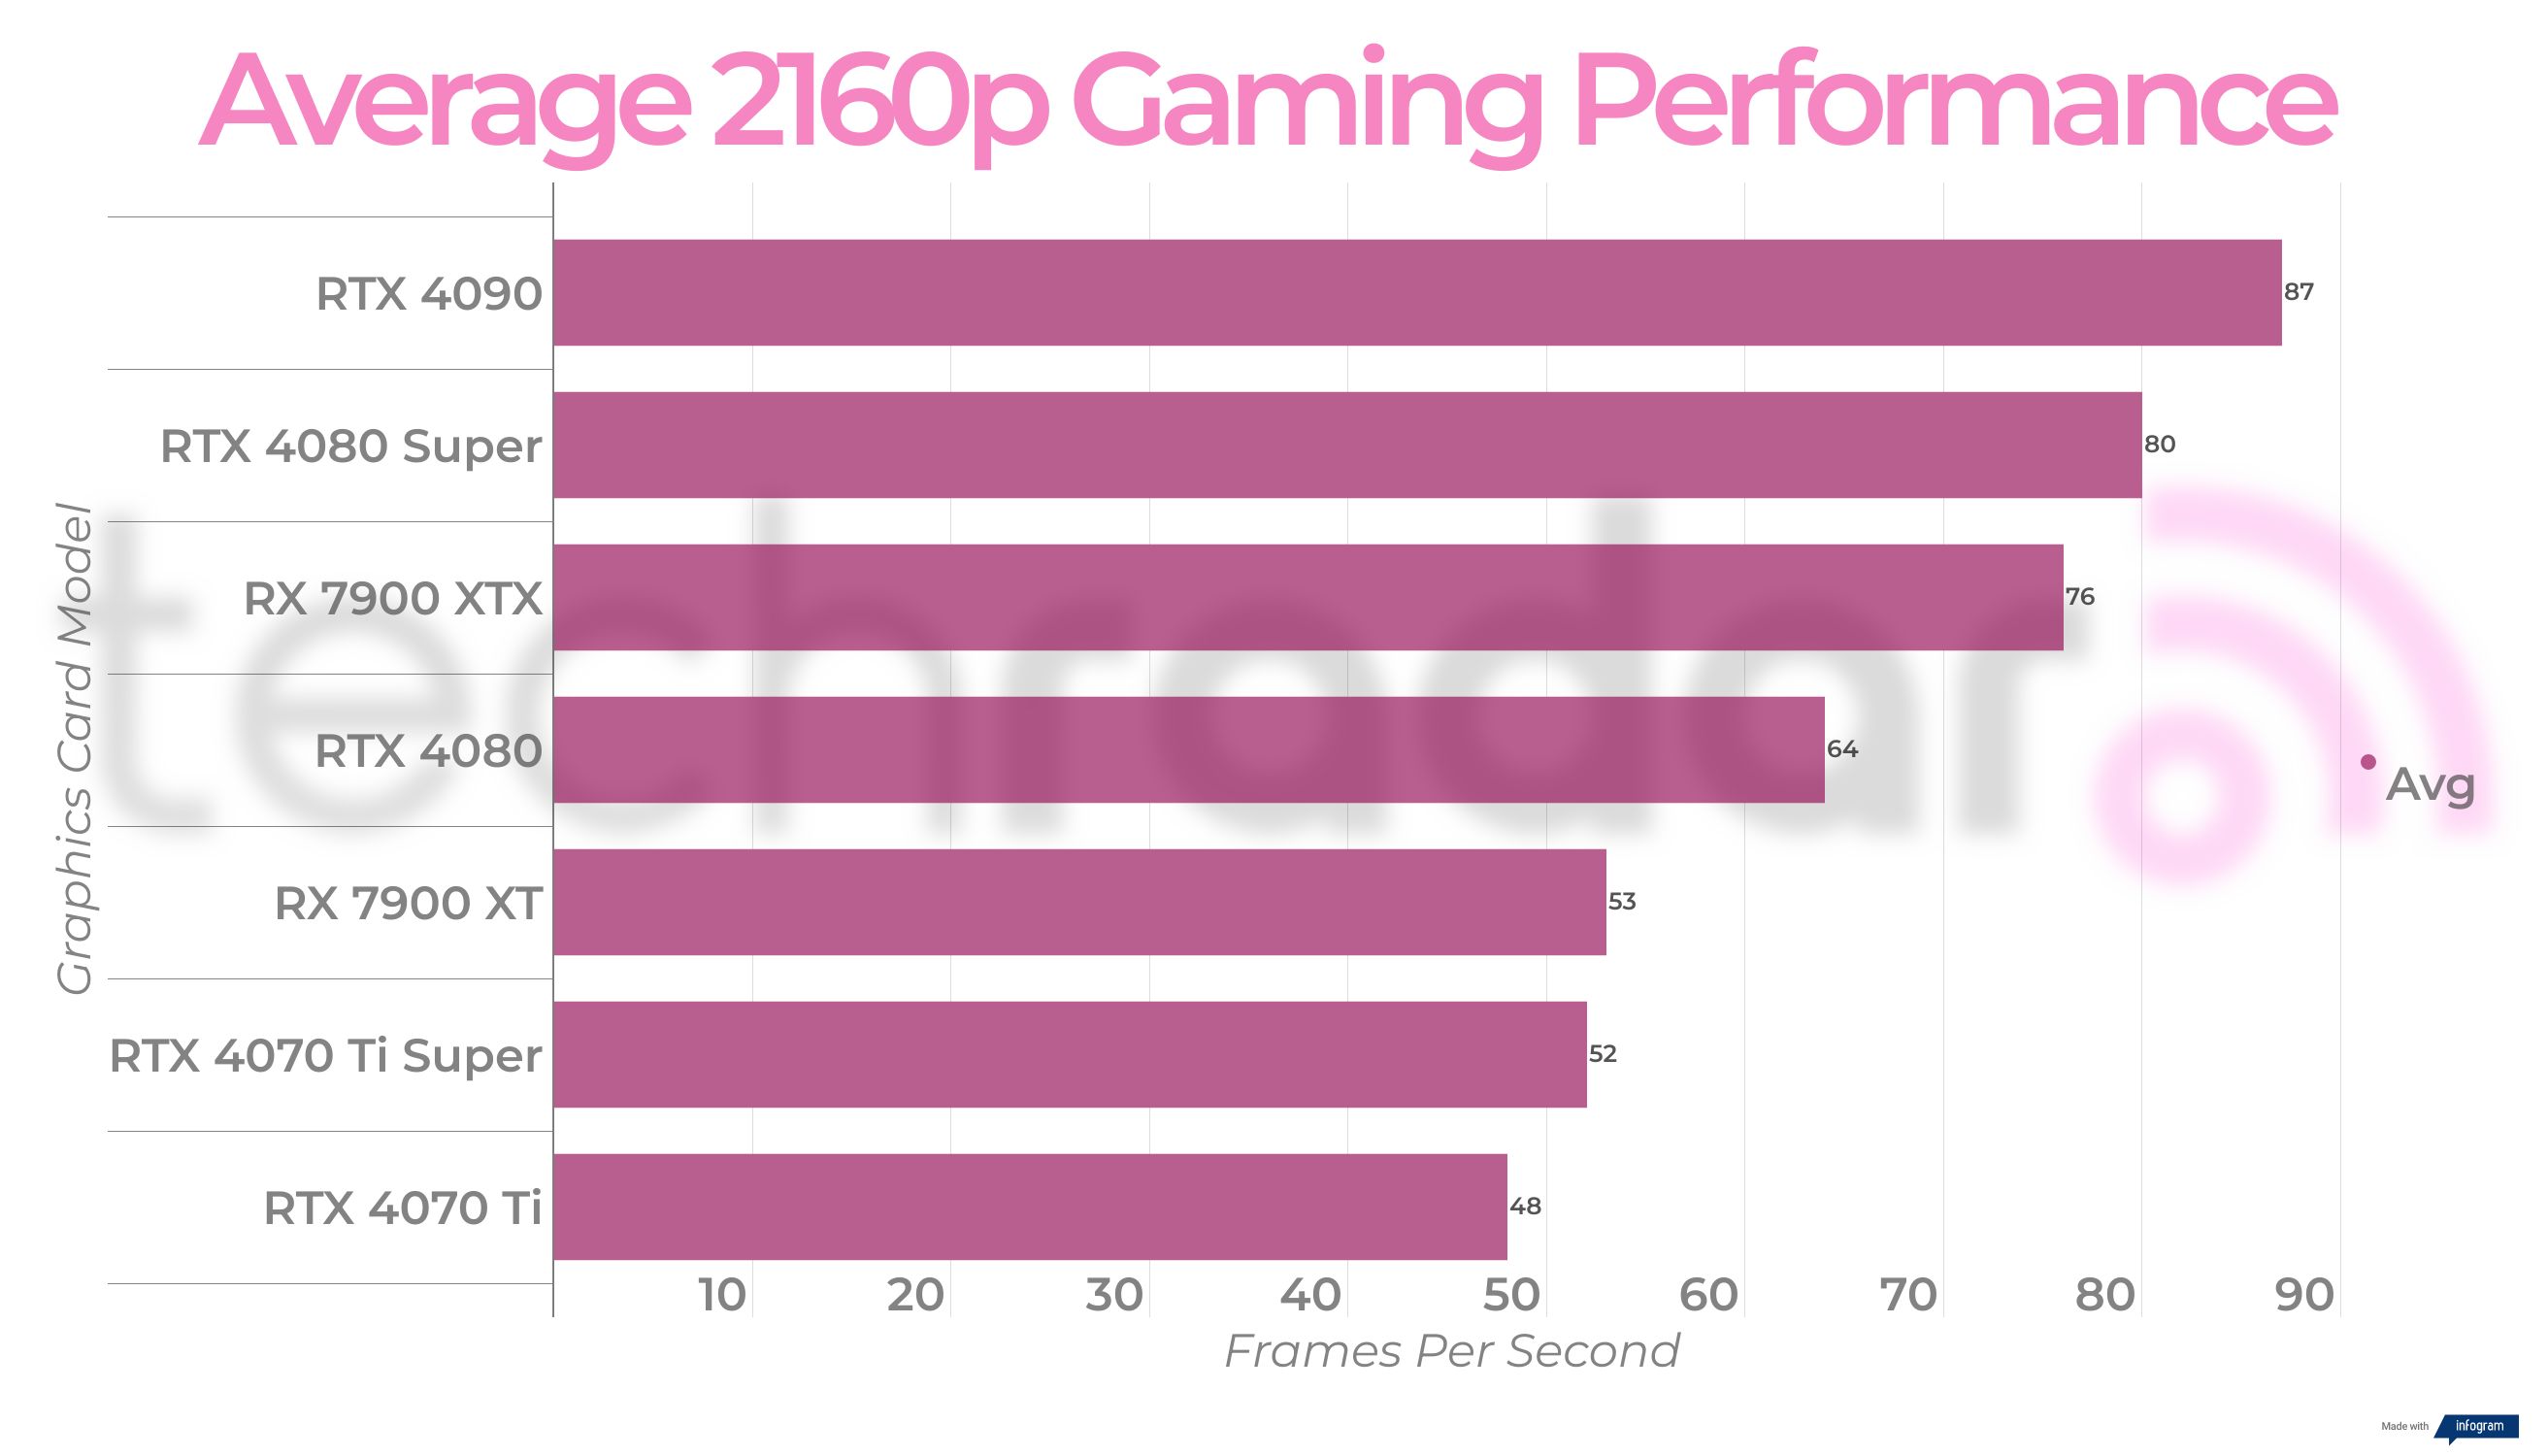 Final performance figures for the Nvidia GeForce RTX 4080 Super